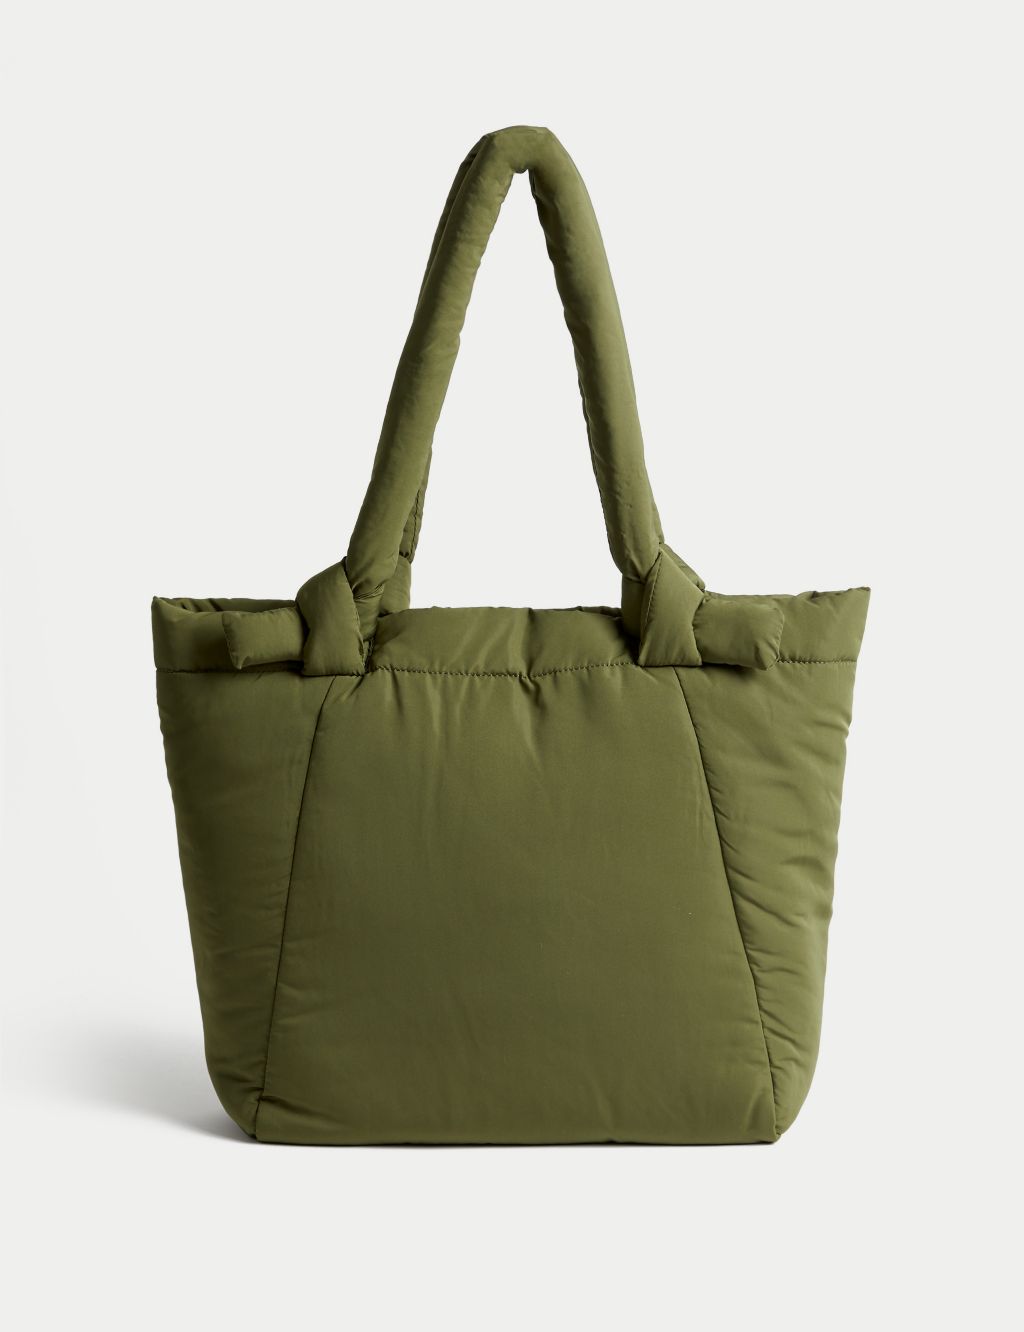 Water Resistant Padded Tote Shopper image 1